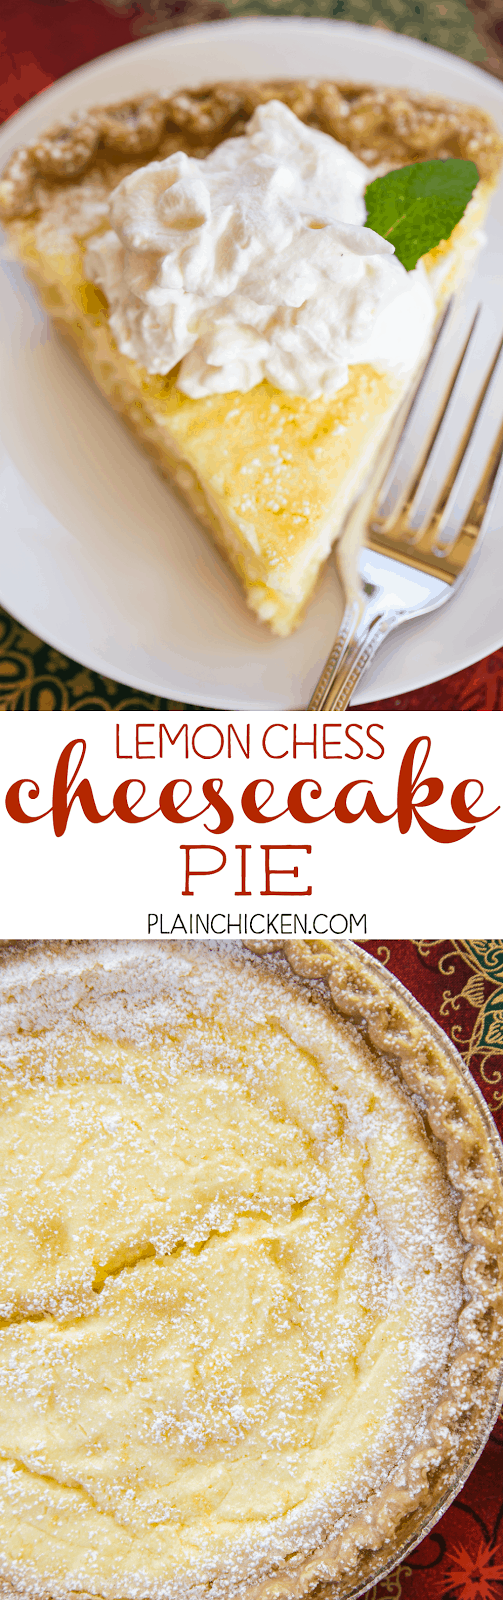 Lemon Chess Cheesecake Pie - two favorites in one dessert! Quick cheesecake layer on the bottom and a delicious homemade lemon chess pie on top! Pie crust, cream cheese, sugar, eggs, butter, milk, lemon juice, lemon rind, flour, cornmeal. Can make ahead of time and refrigerate until ready to serve. Top with fresh homemade whipped cream. SO good! A MUST for your holiday meal!!